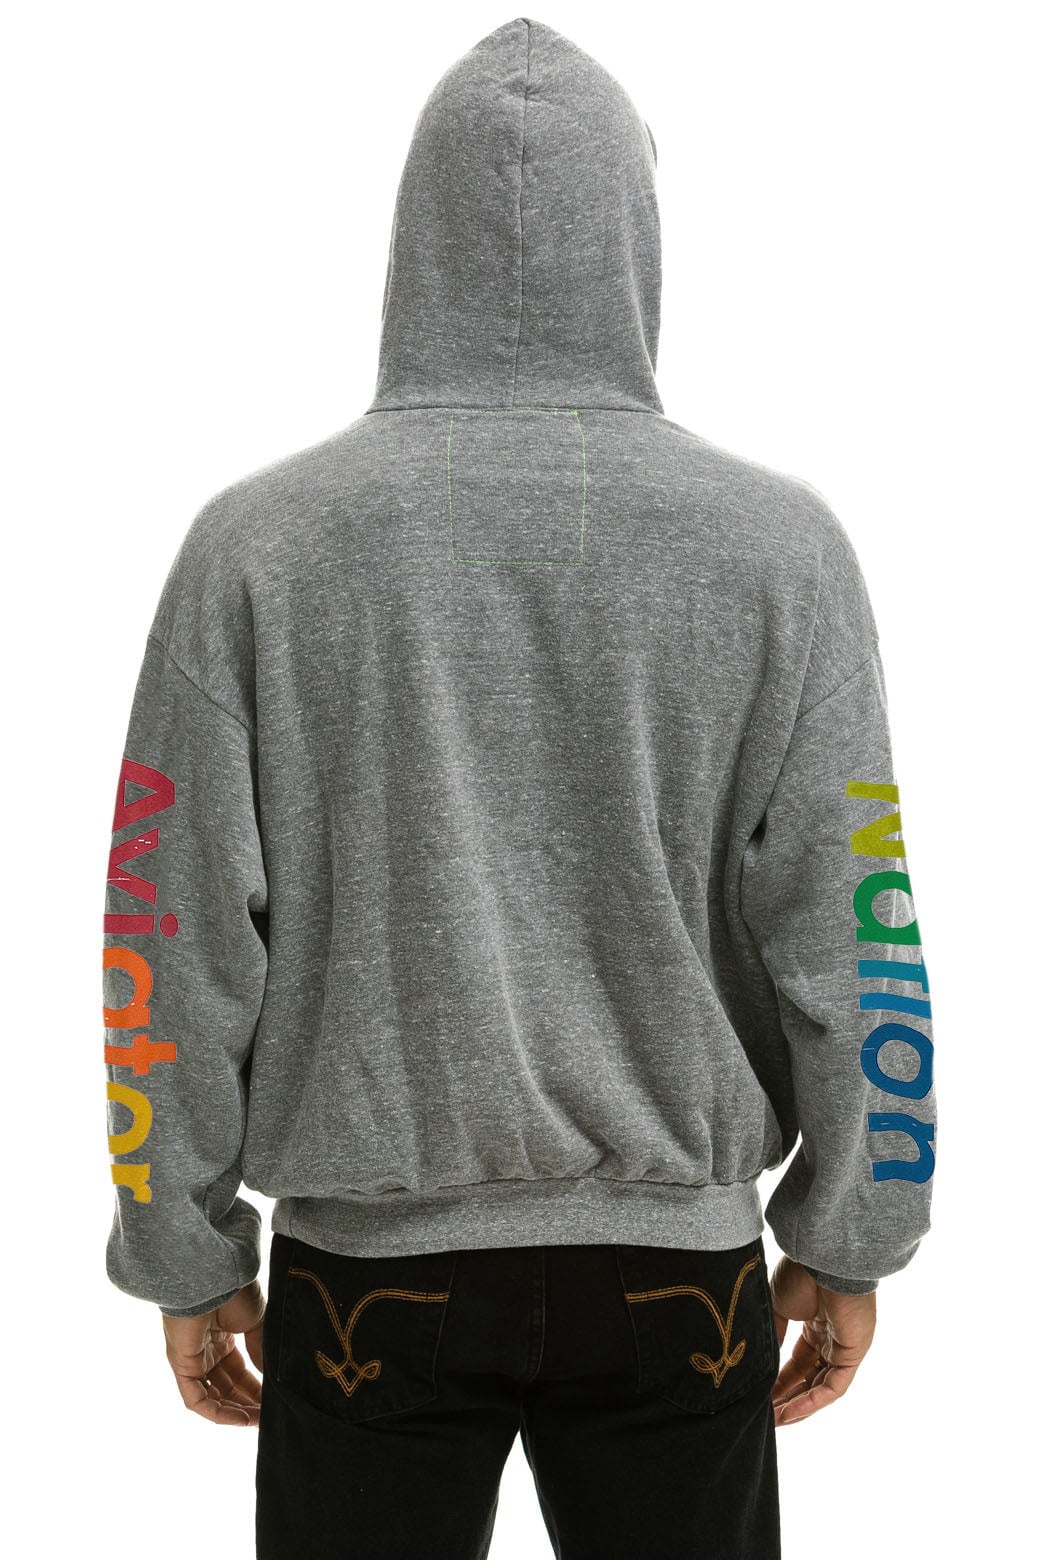 AVIATOR NATION NASHVILLE RELAXED PULLOVER HOODIE - HEATHER GREY Hoodie Aviator Nation 